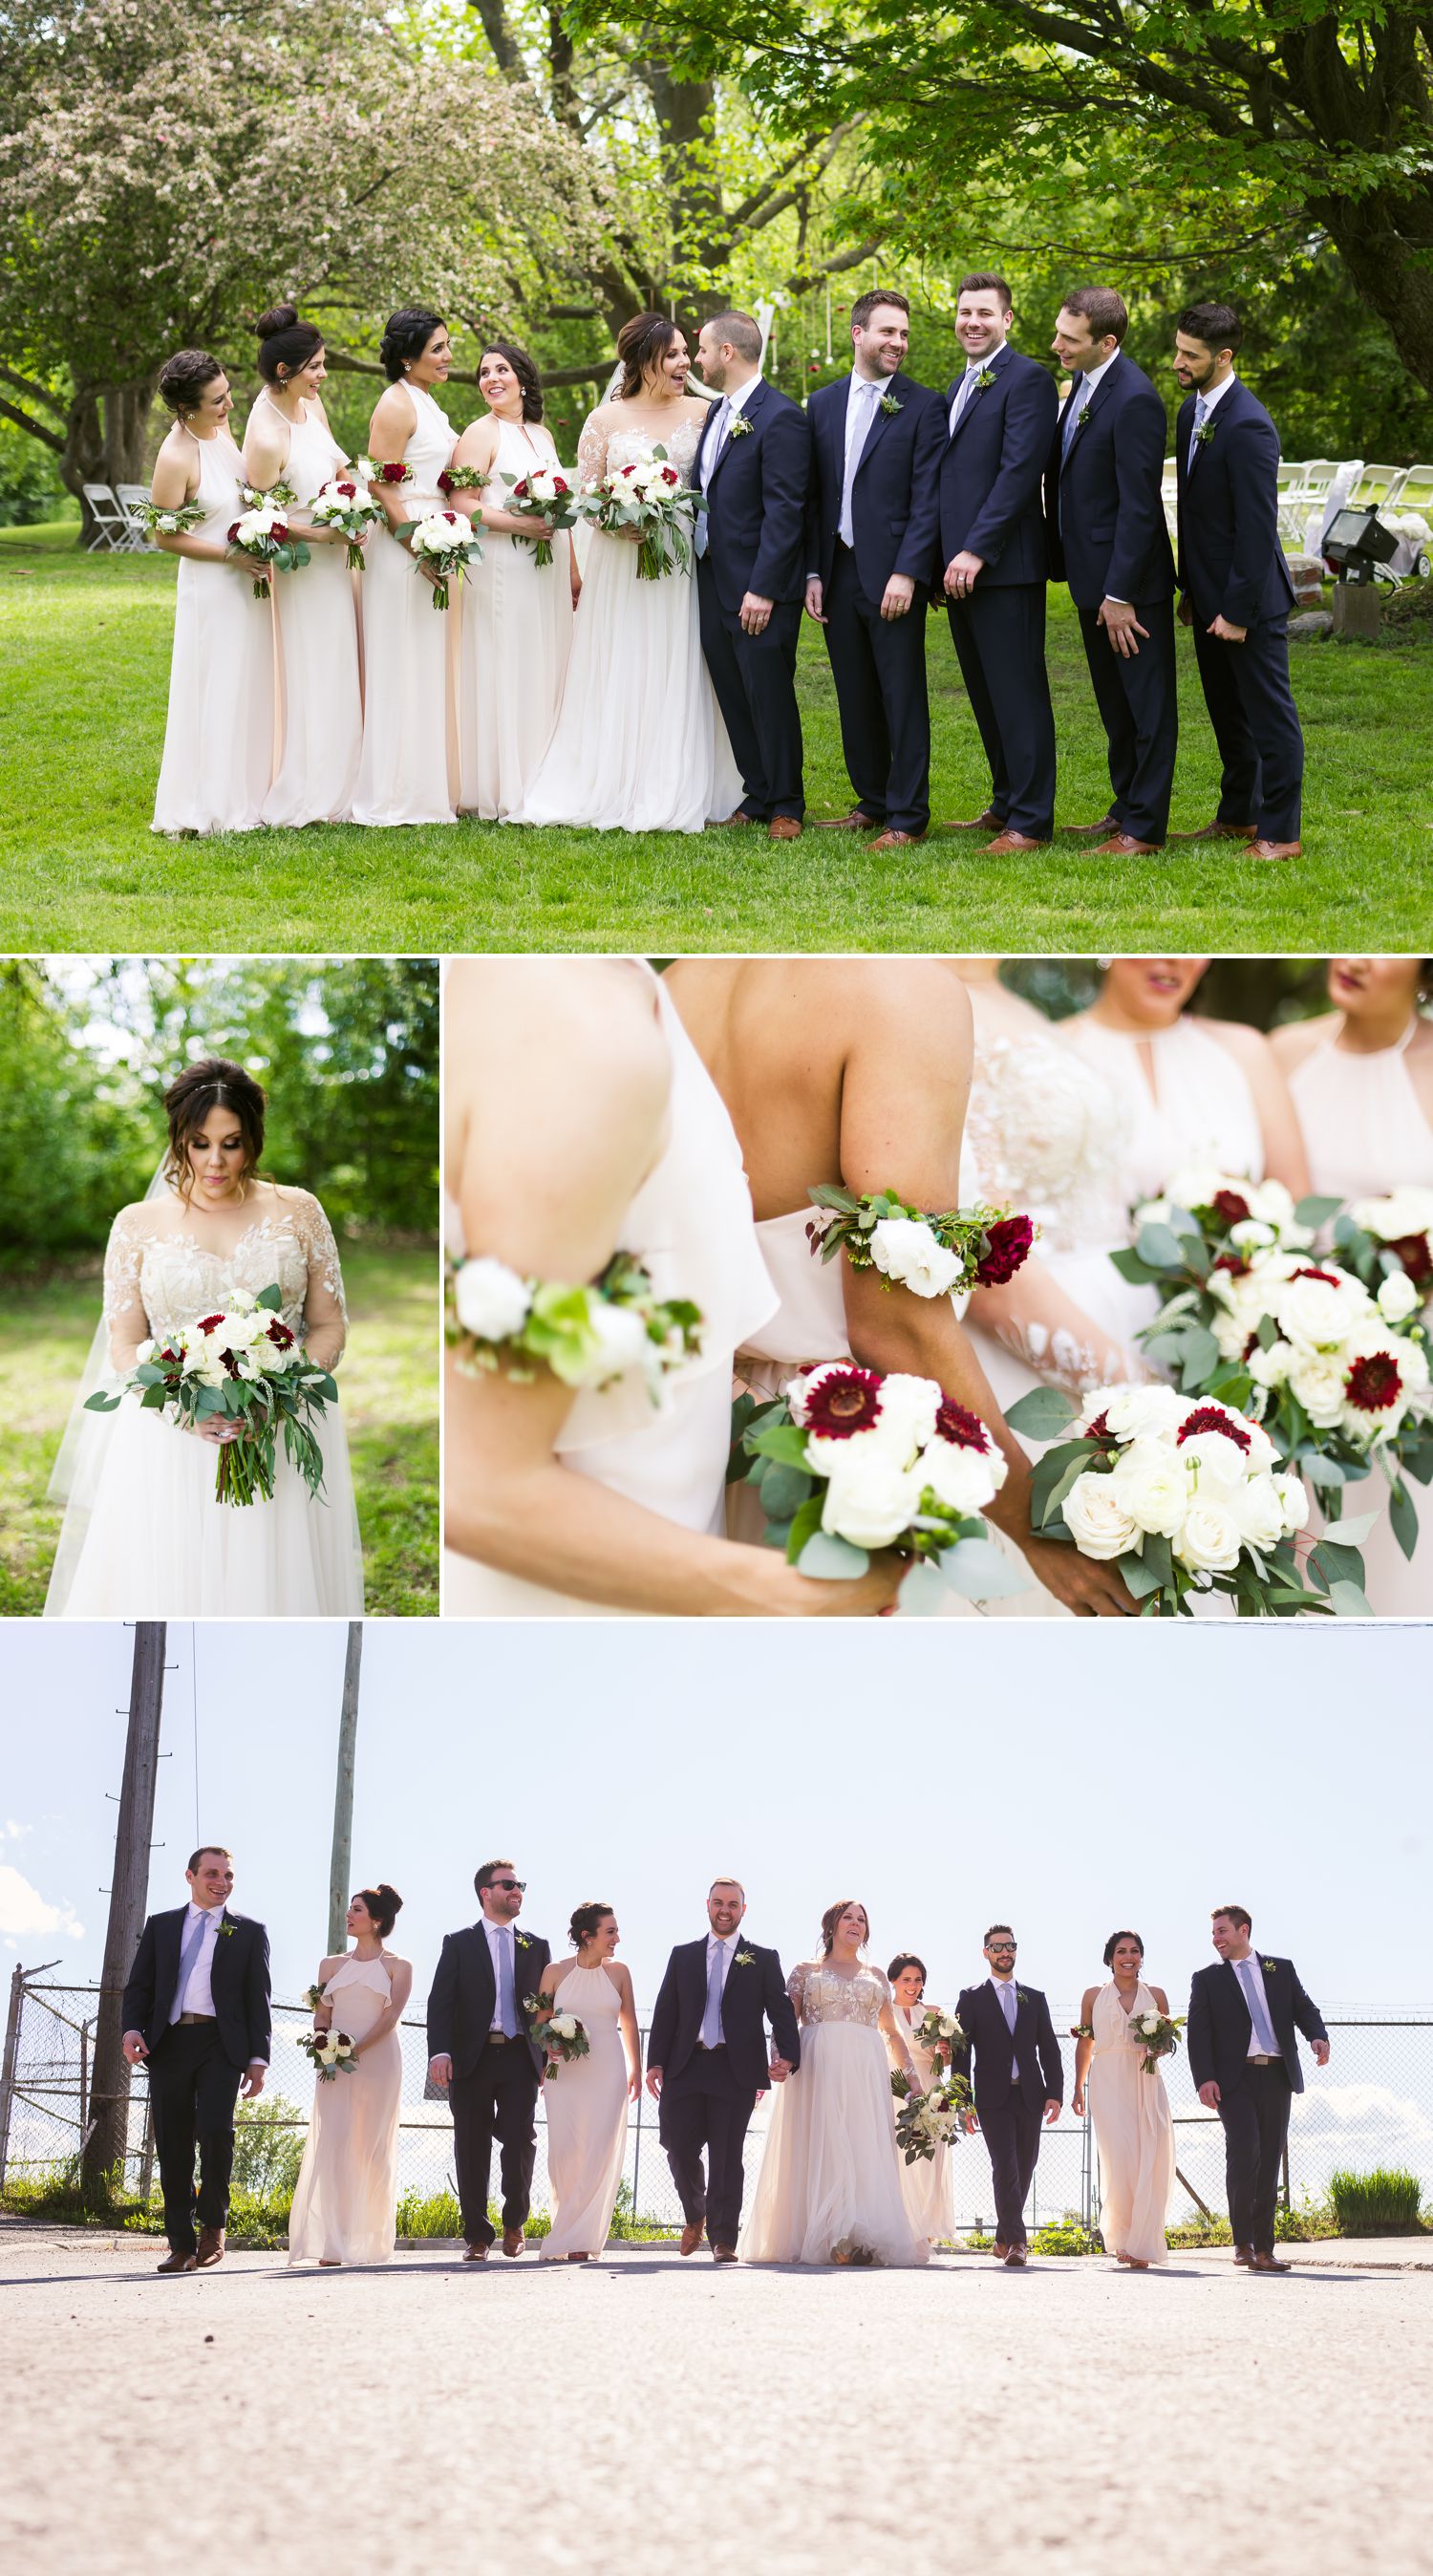 Portraits of the bride and groom with their wedding party outside at Billings Estate in Ottawa